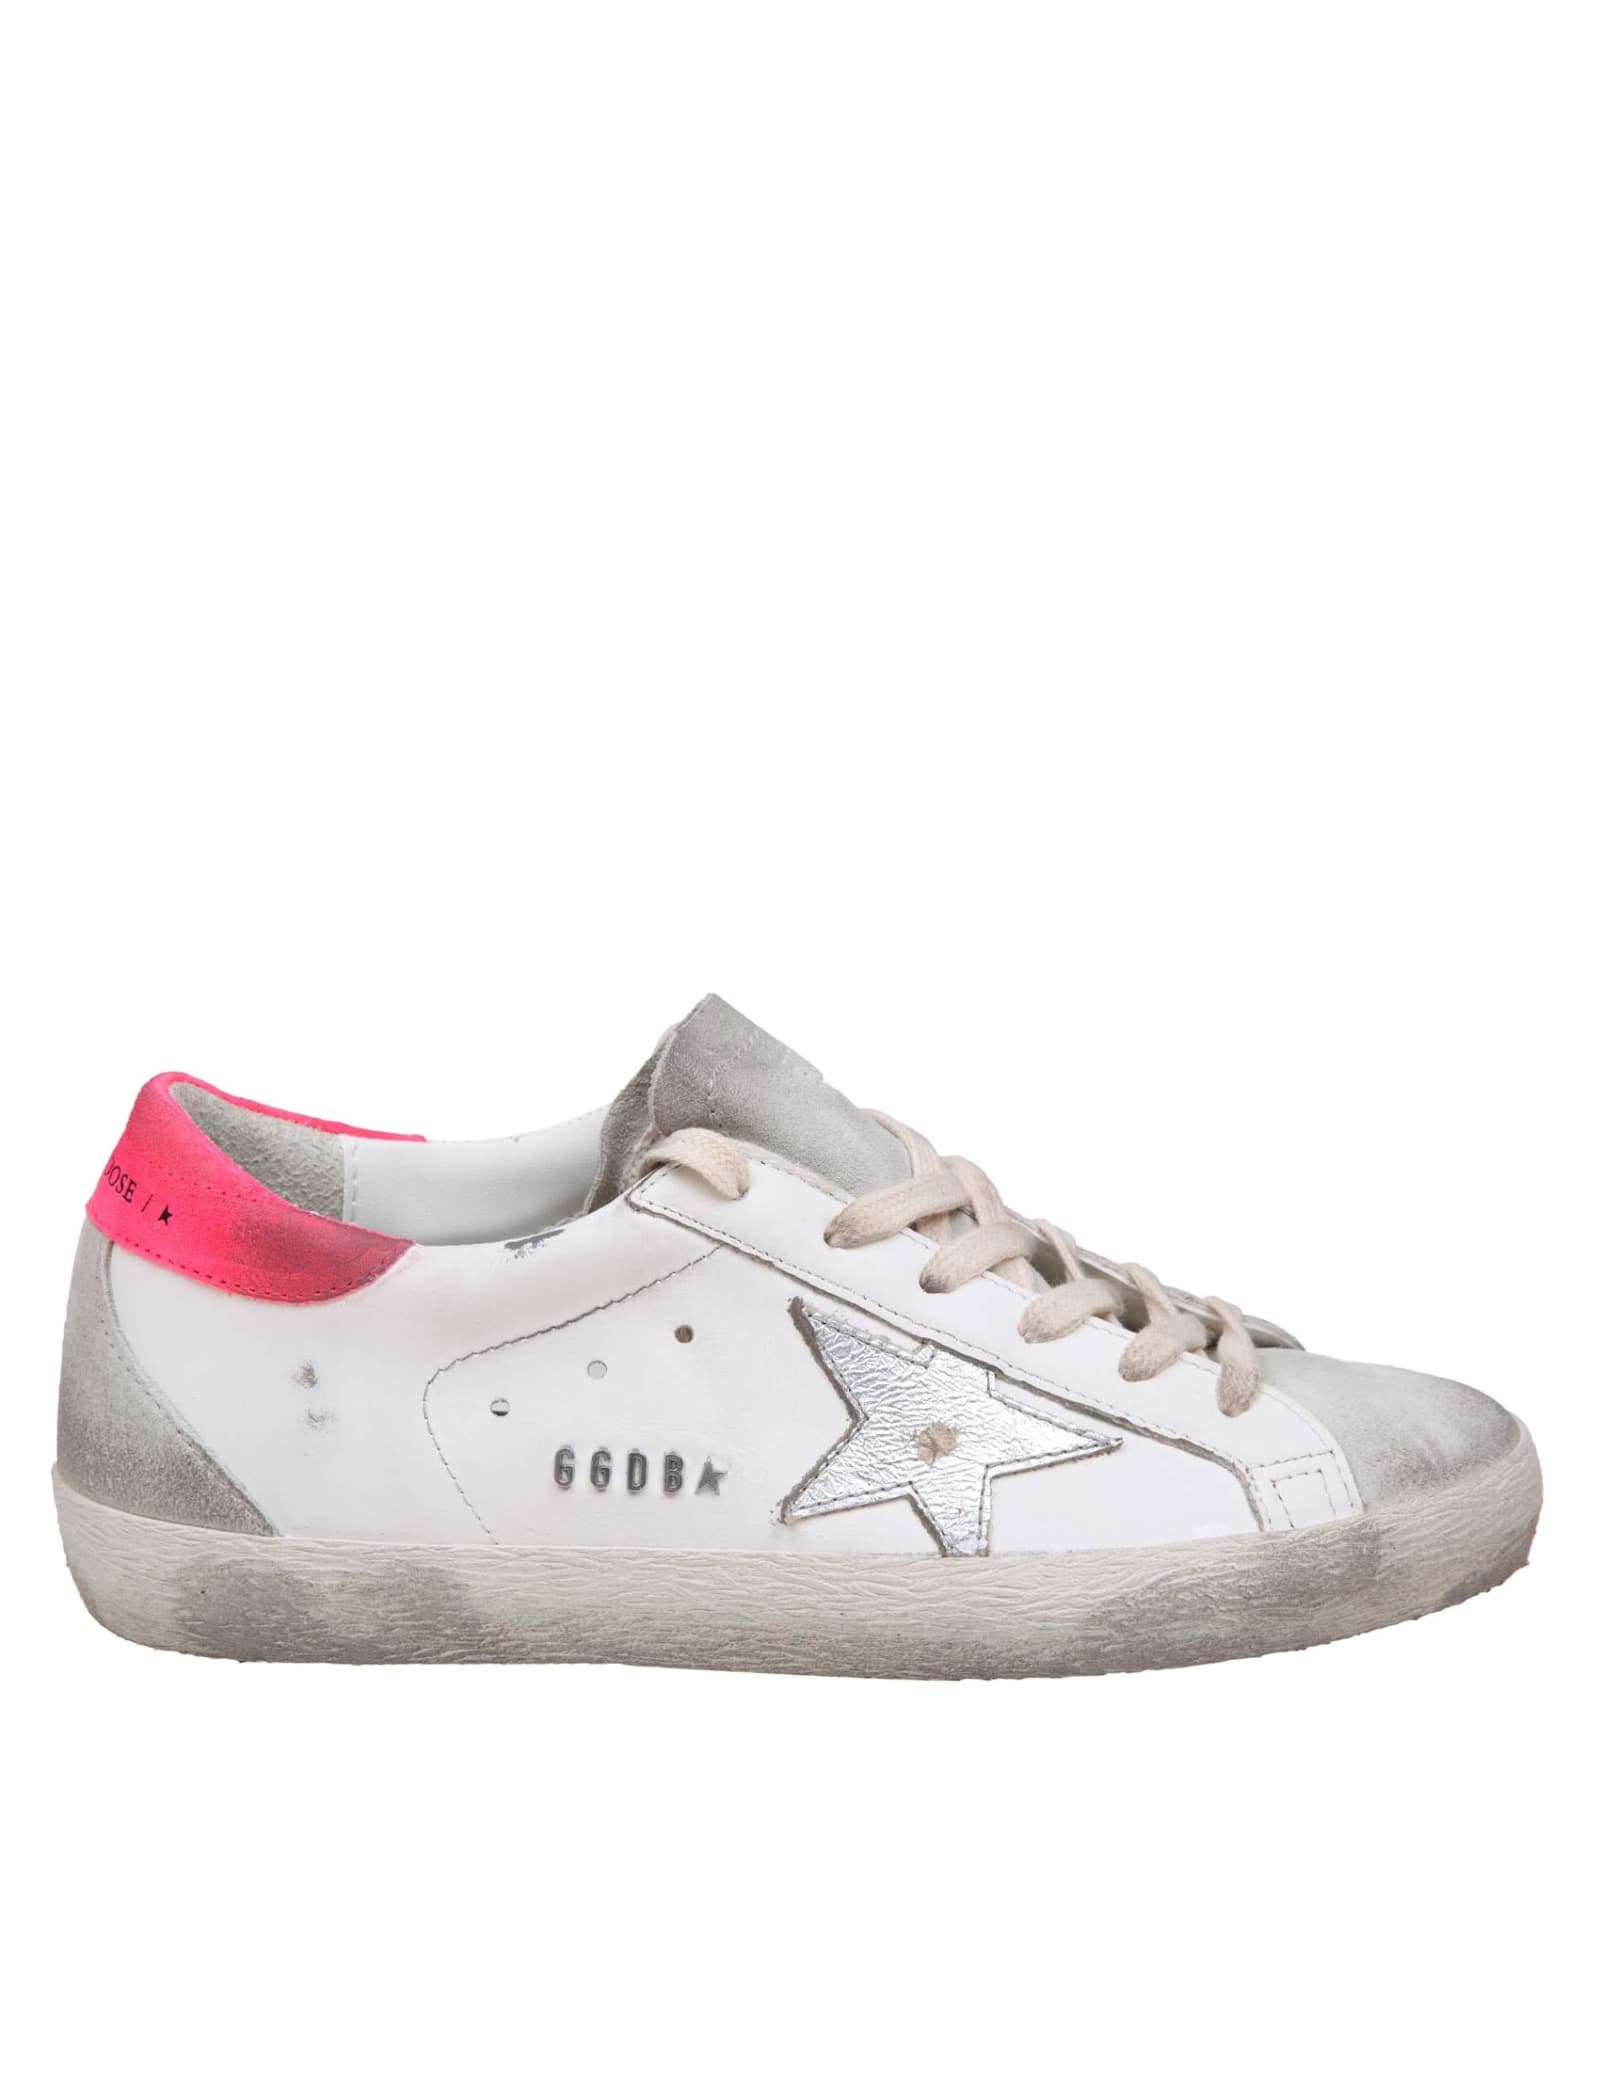 GOLDEN GOOSE GOLDEN GOOSE SUPER-STAR SNEAKERS IN WHITE AND SILVER LEATHER AND SUEDE